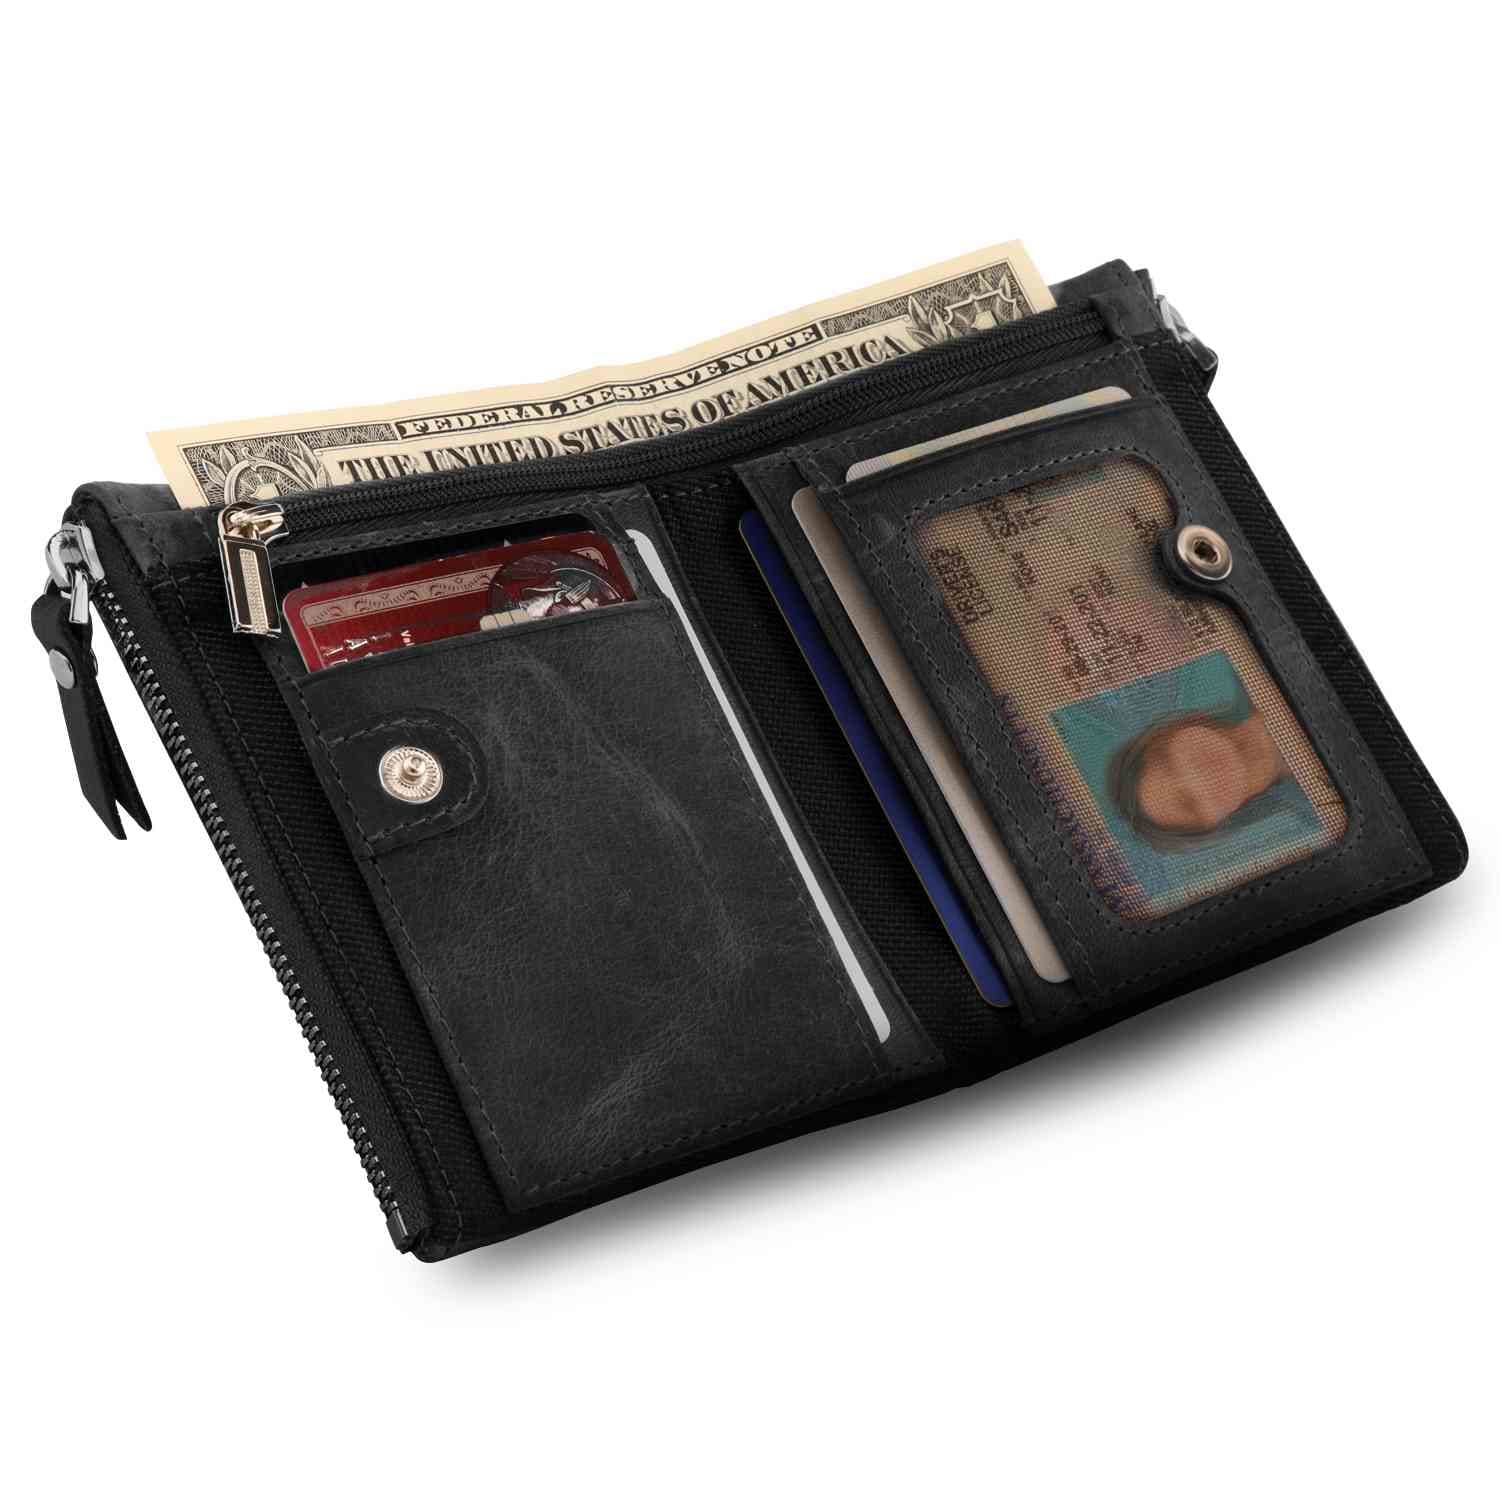 Crossbody Fashion Cell Phone Bag With Multipurpose Wallet  Lightweight,Modern,Business Credit Card,ID Card,Money,Cash Phone Wallet  With Zipper Business Casual Teacher'S Day,Teacher Gifts,Work, Business,  Commute,Travel,Holiday,Office,Vacation,For ...